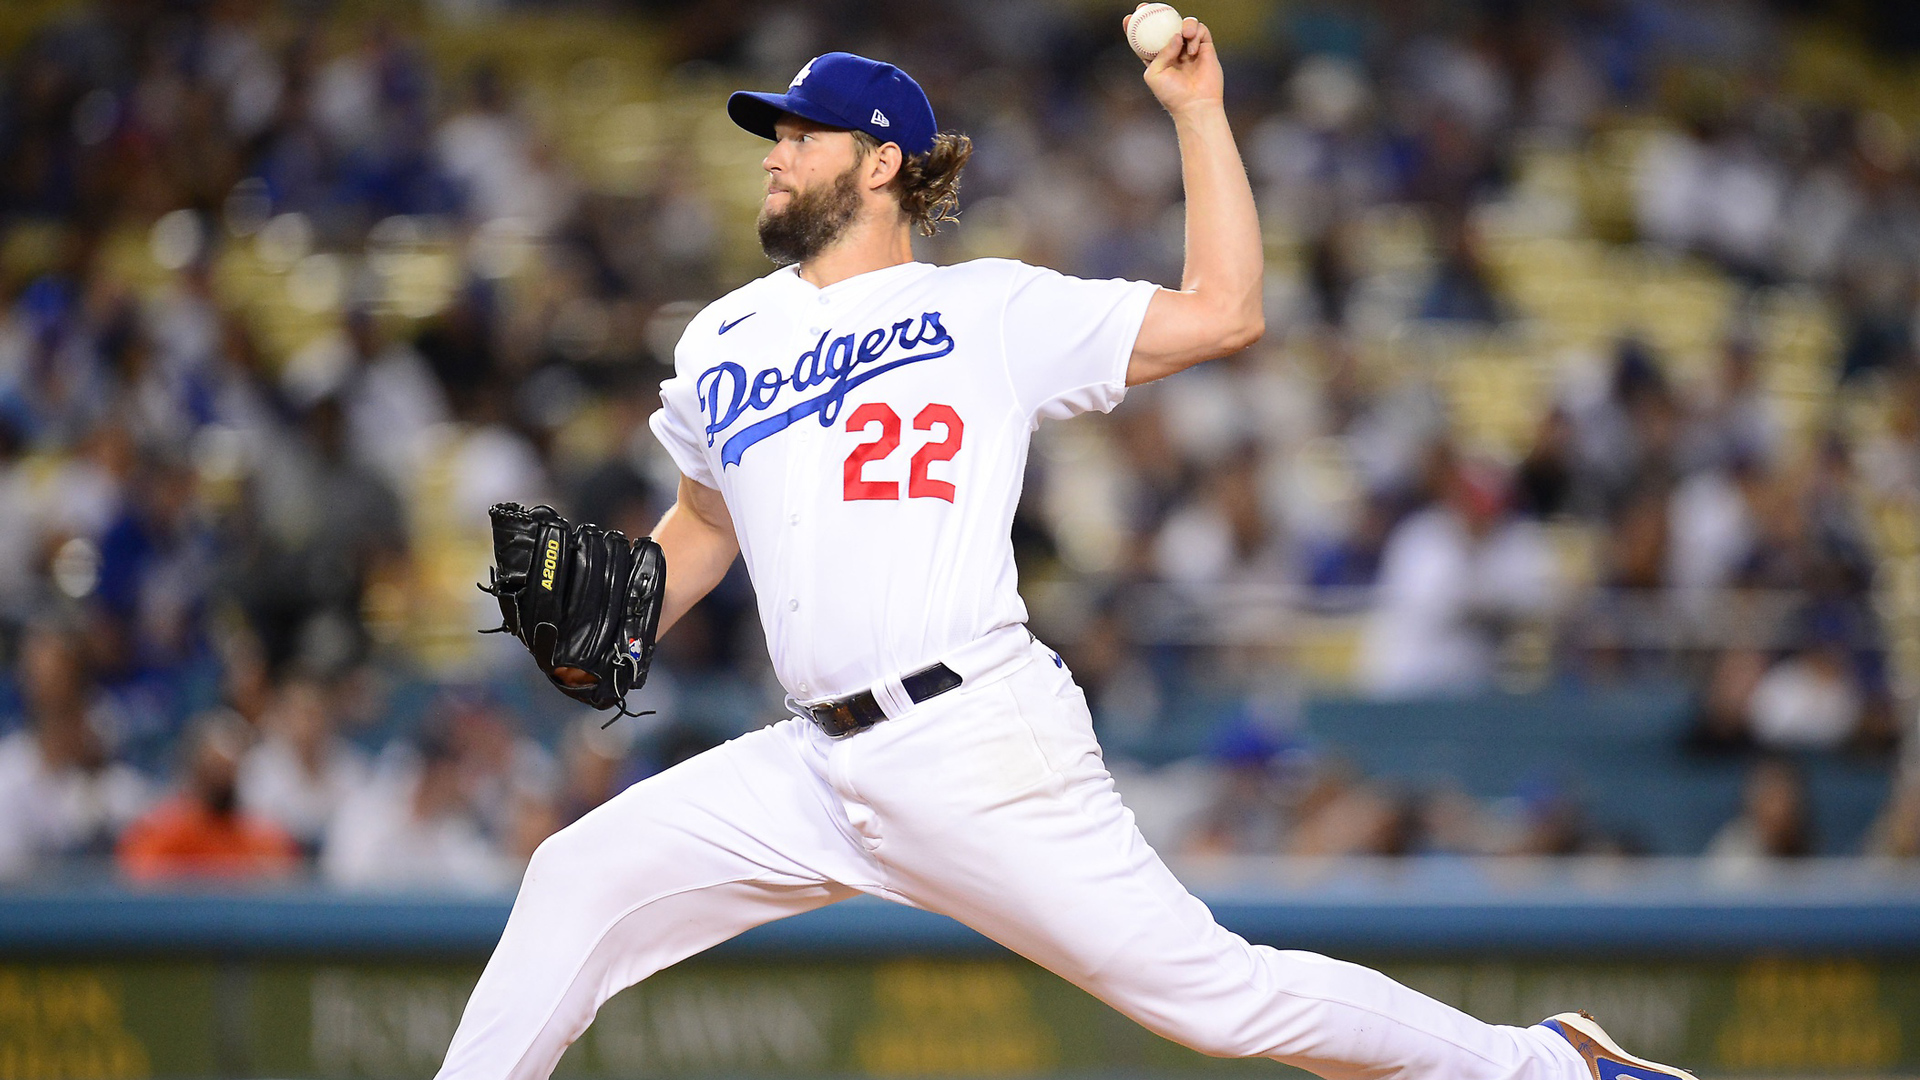 Dodgers Pride Night controversy explained: Clayton Kershaw speaks out  against Sisters of Perpetual Indulgence 